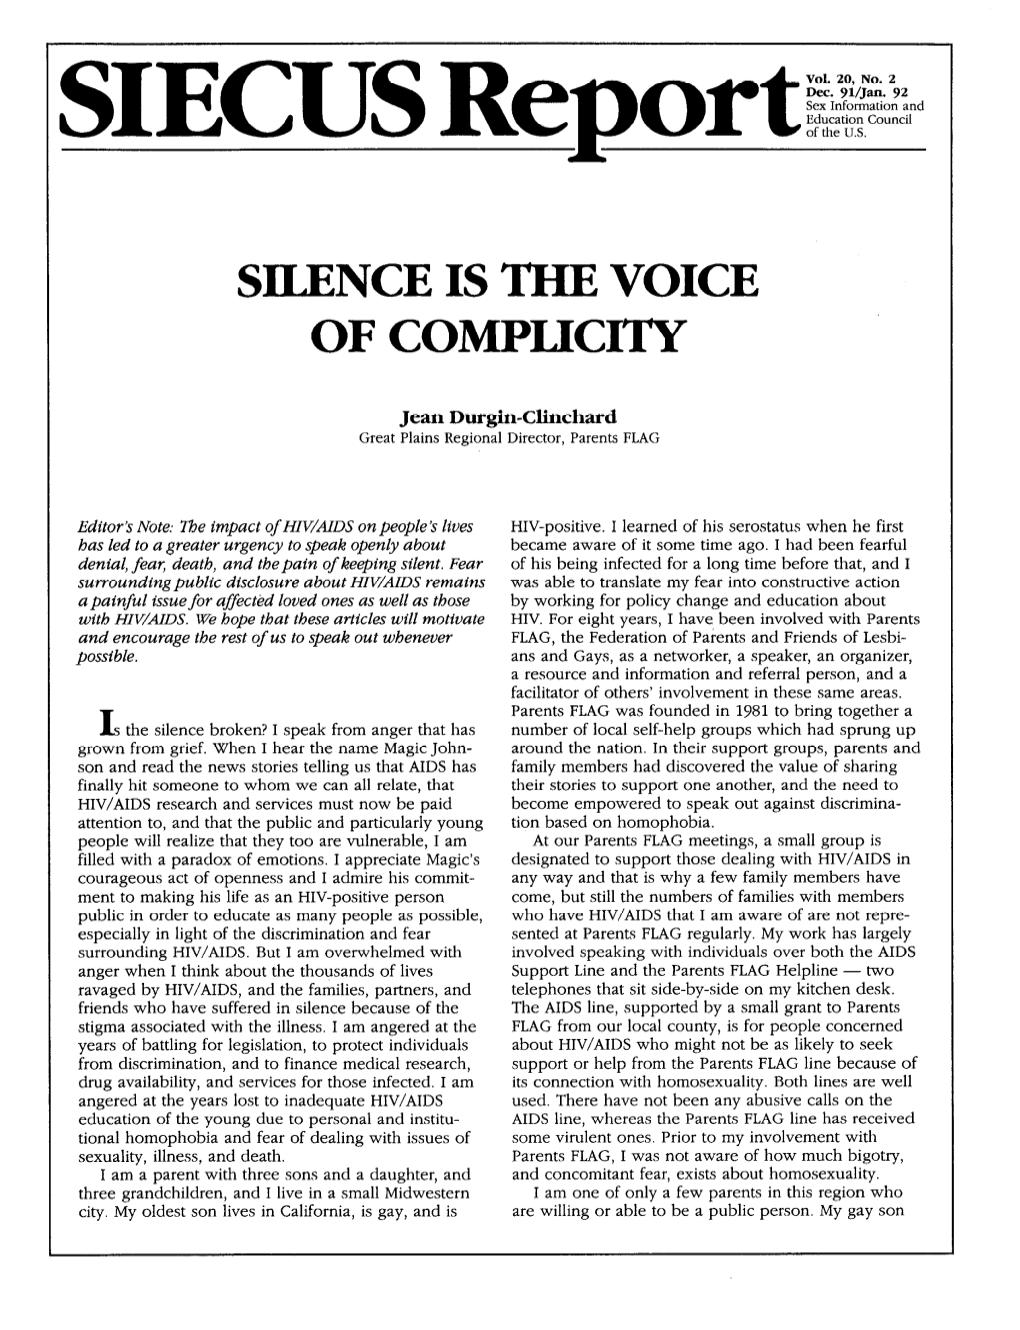 Silence Is the Voice of Complicity